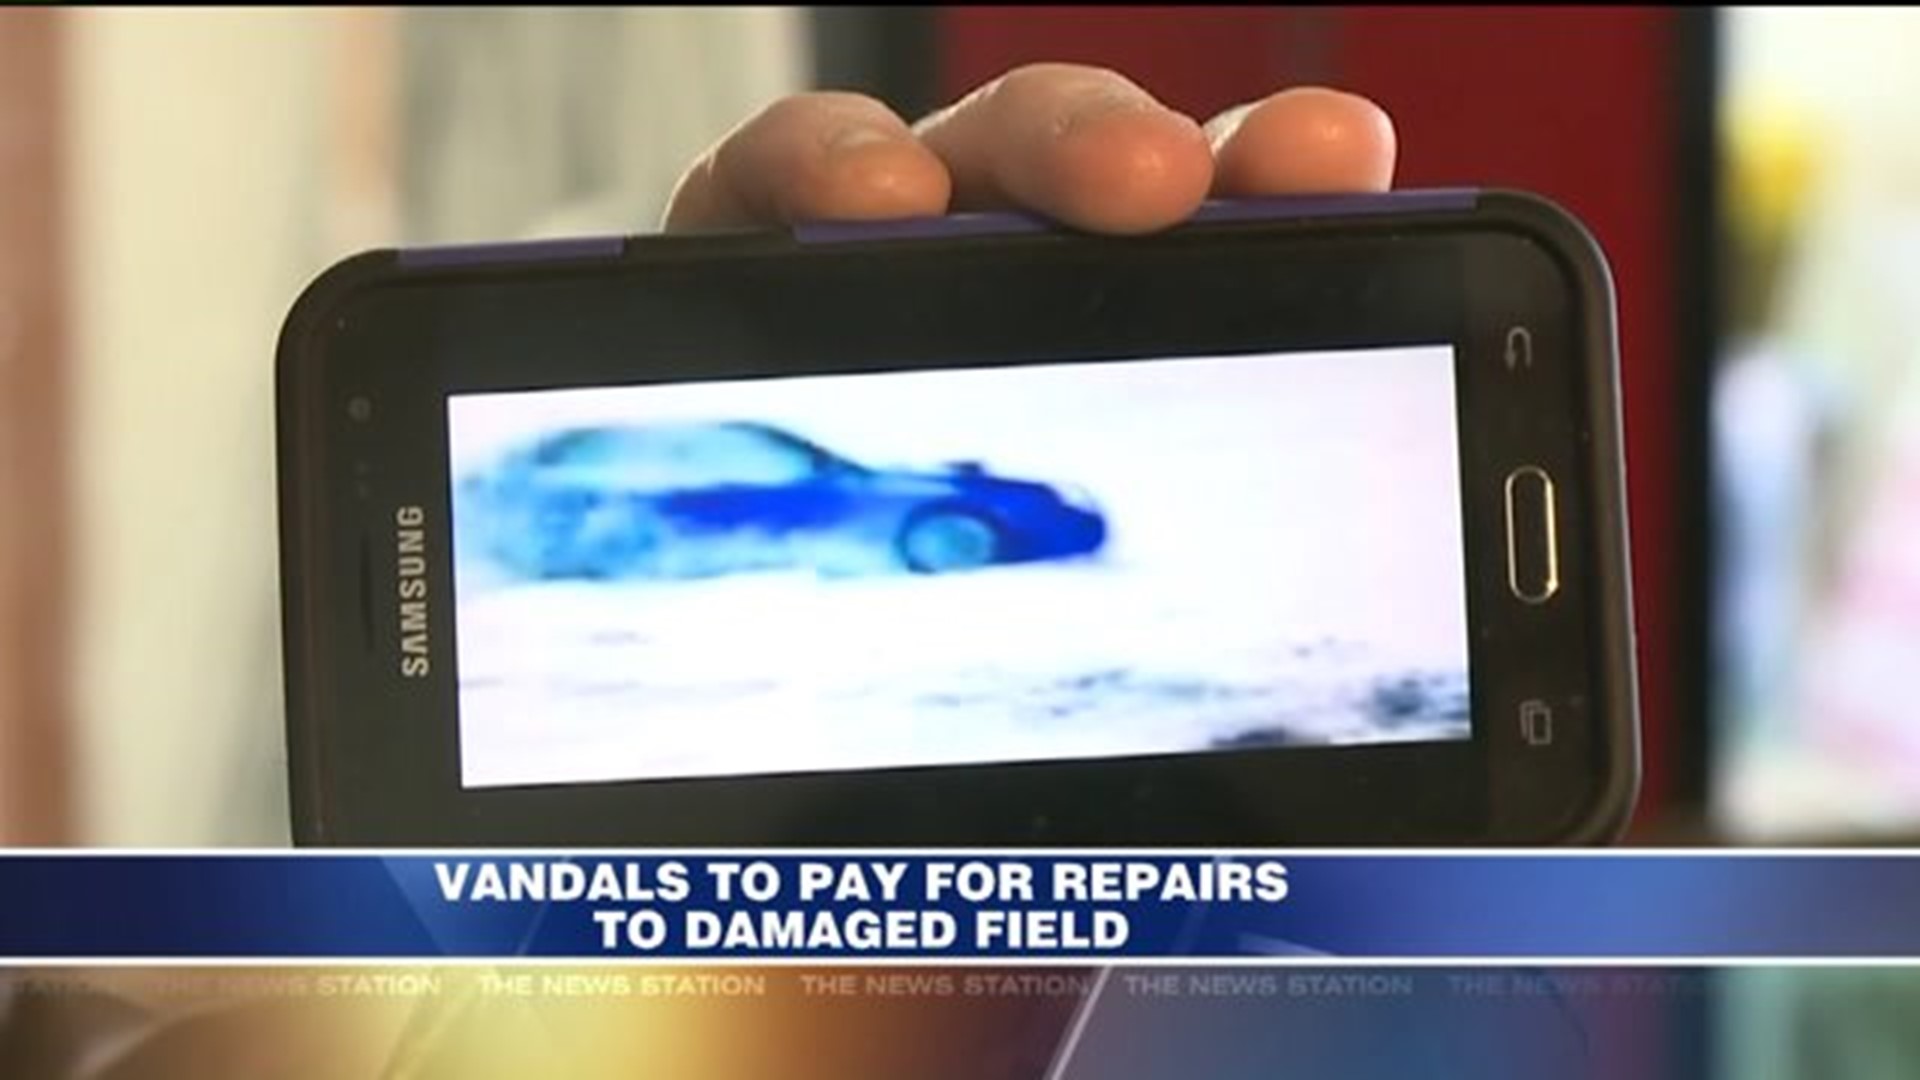 Vandals to Pay for Repairs to Damaged Field